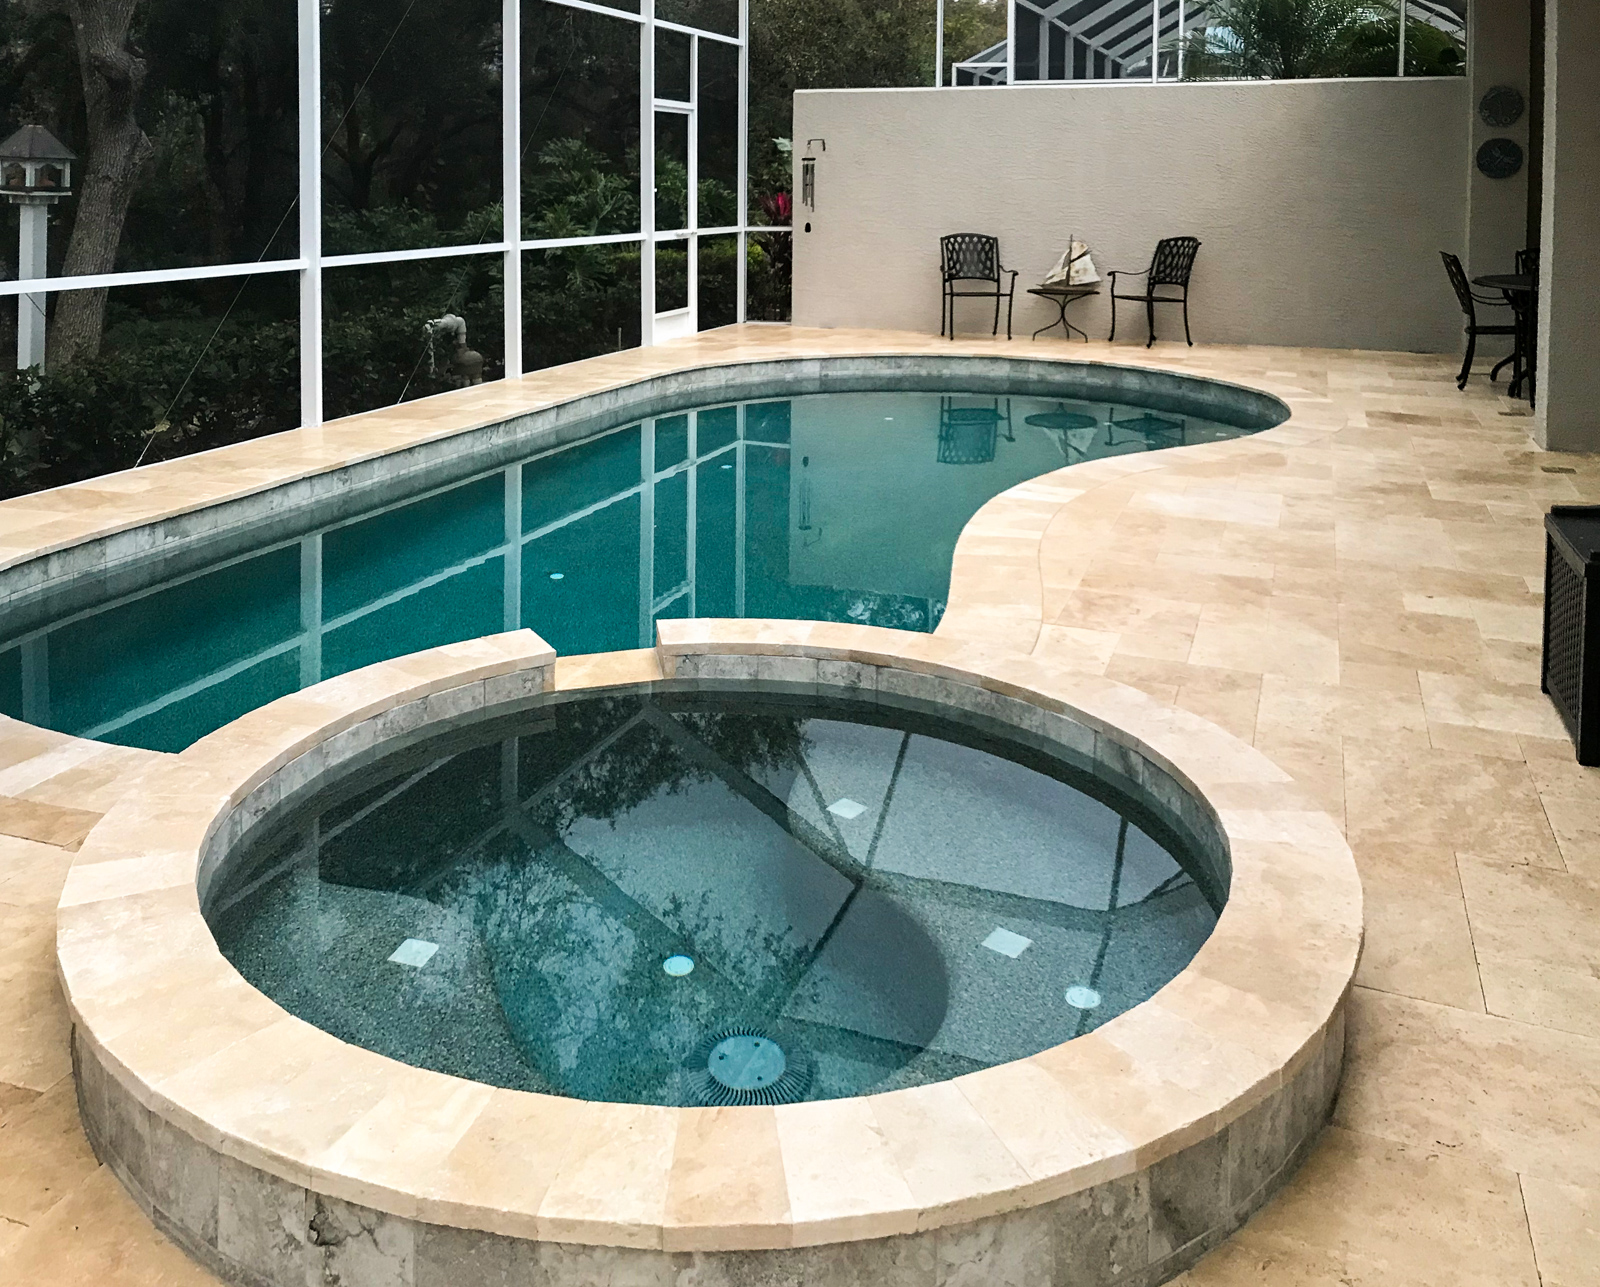 Pool and Spa remodel in Lakewood Ranch